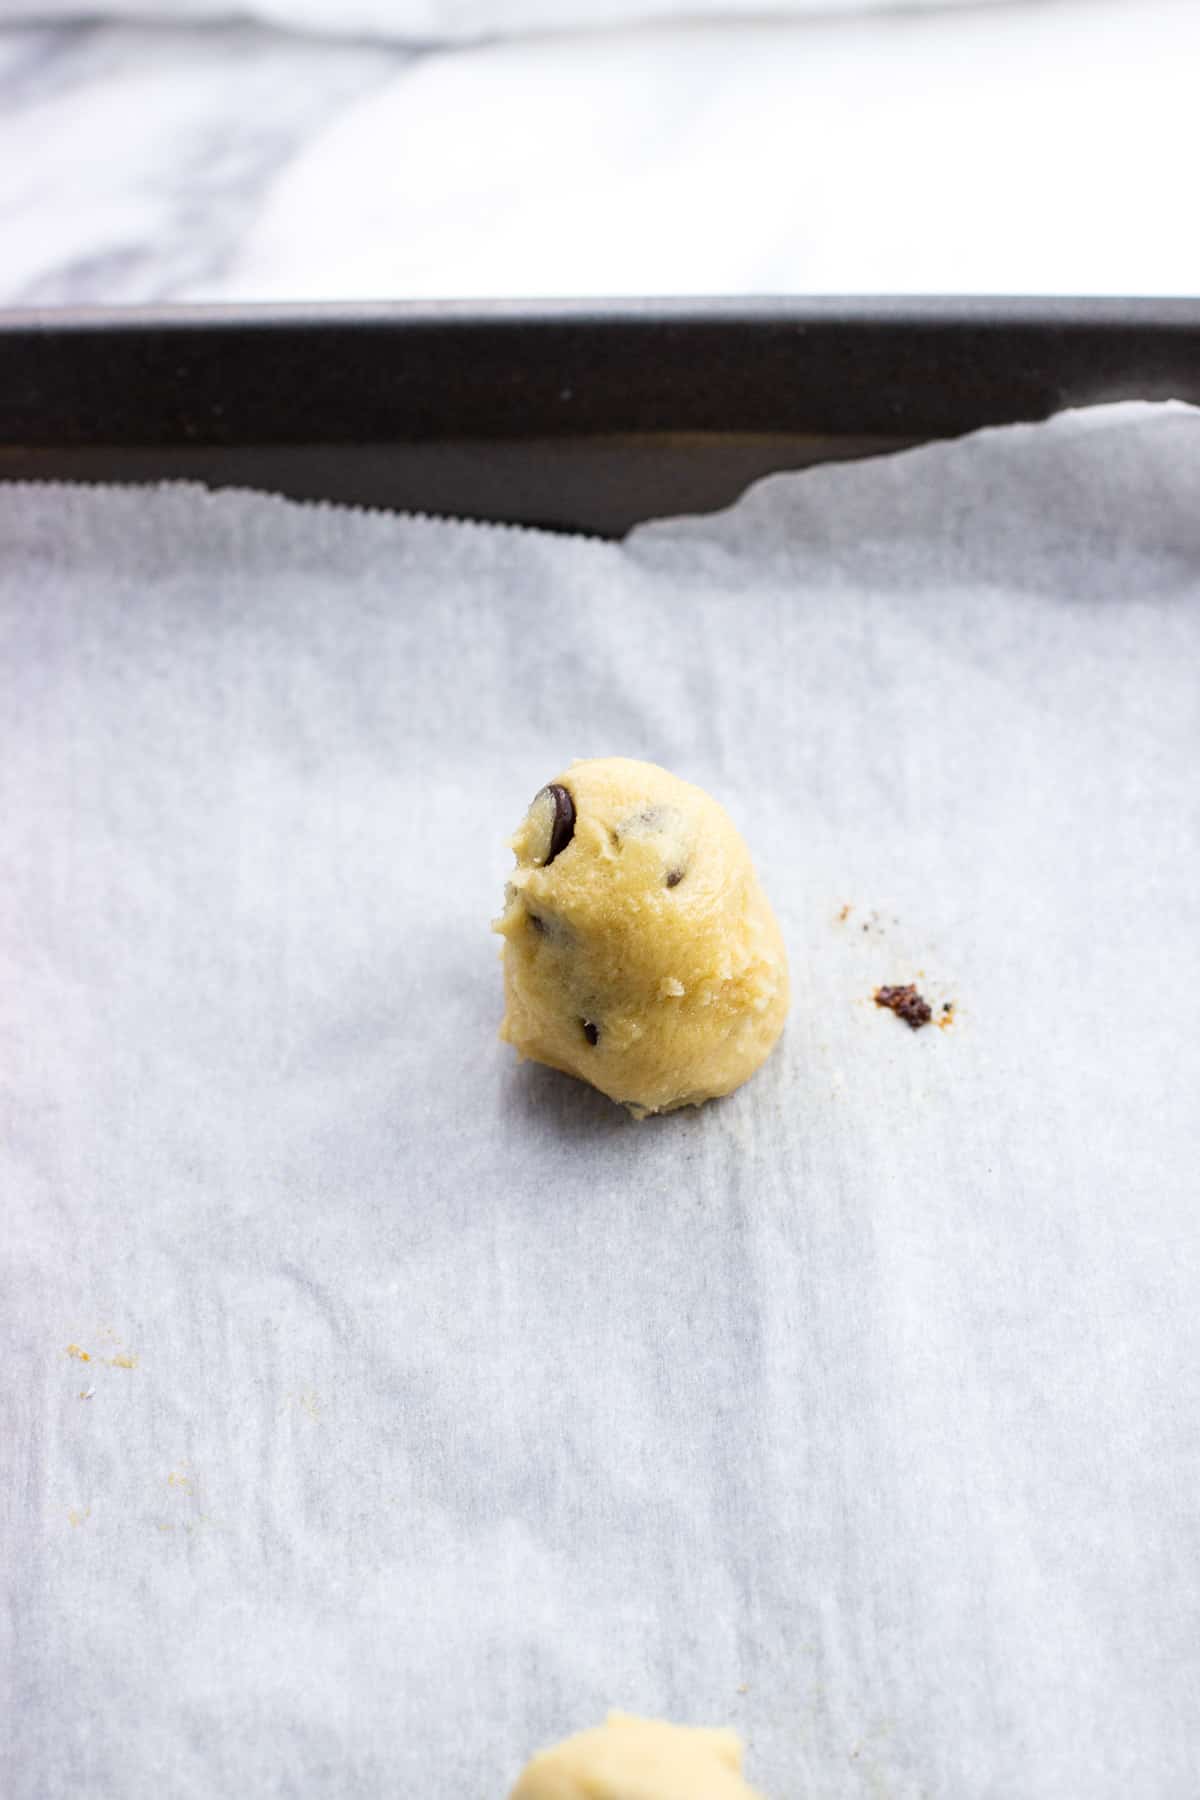 Tall oval shaped cookie dough on a parchment-lined sheet pan.